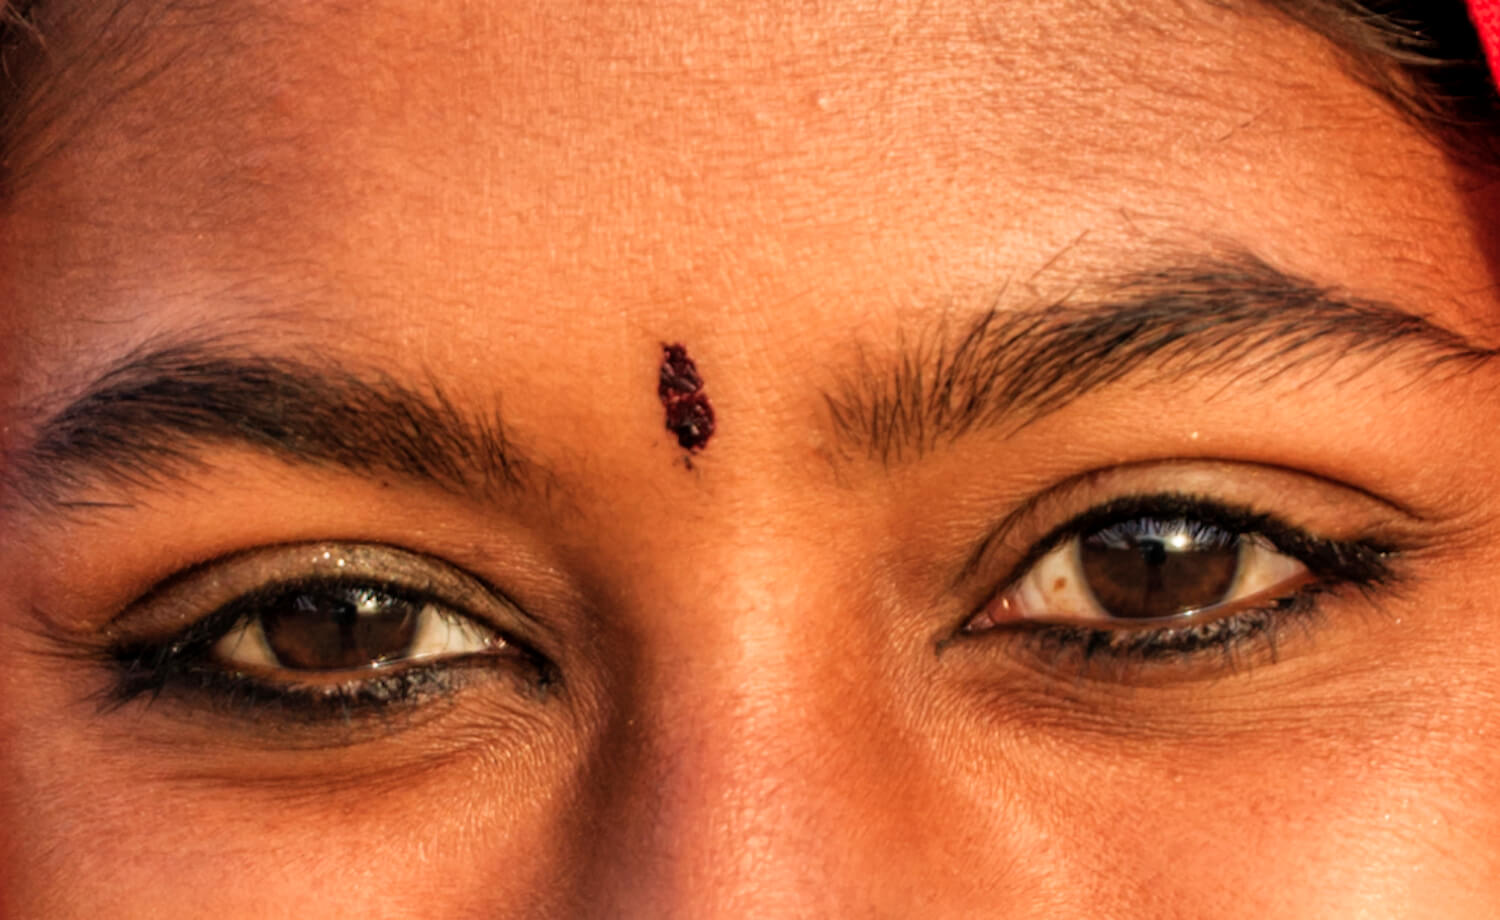 close-up of an Indian woman's eyes